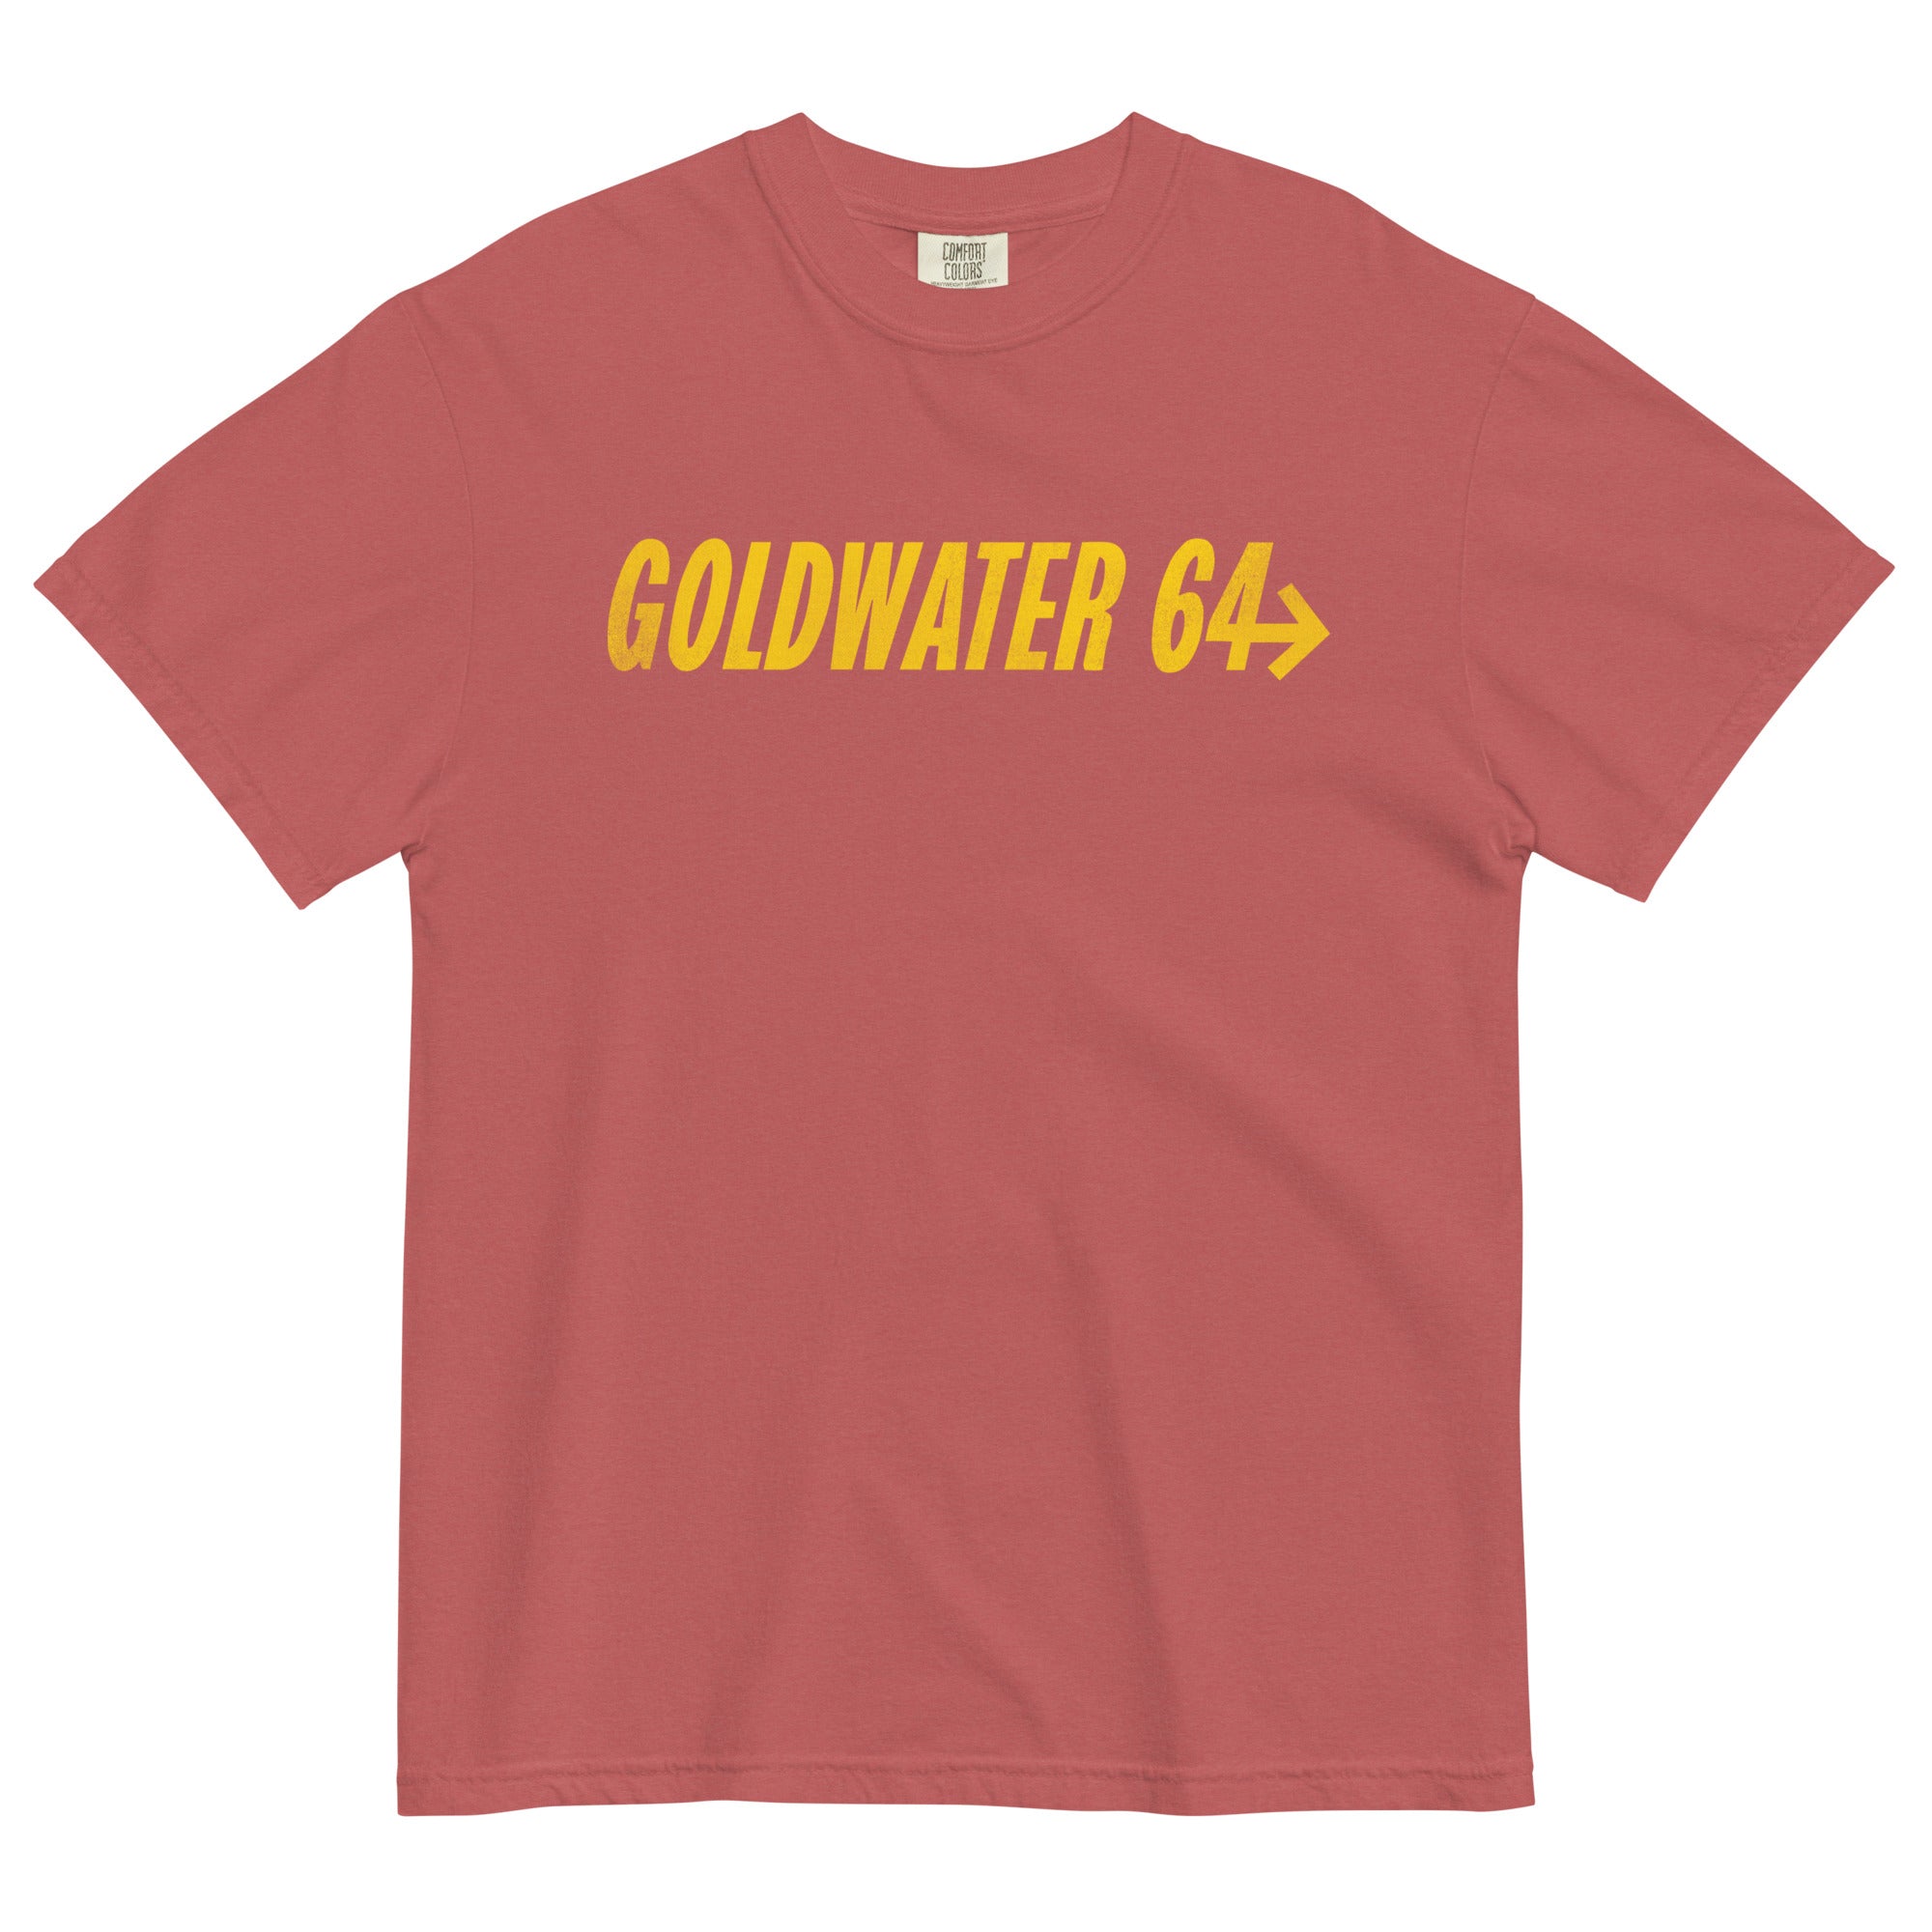 Goldwater 1964 Men’s Garment-dyed Heavyweight Reproduction Campaign T-shirt